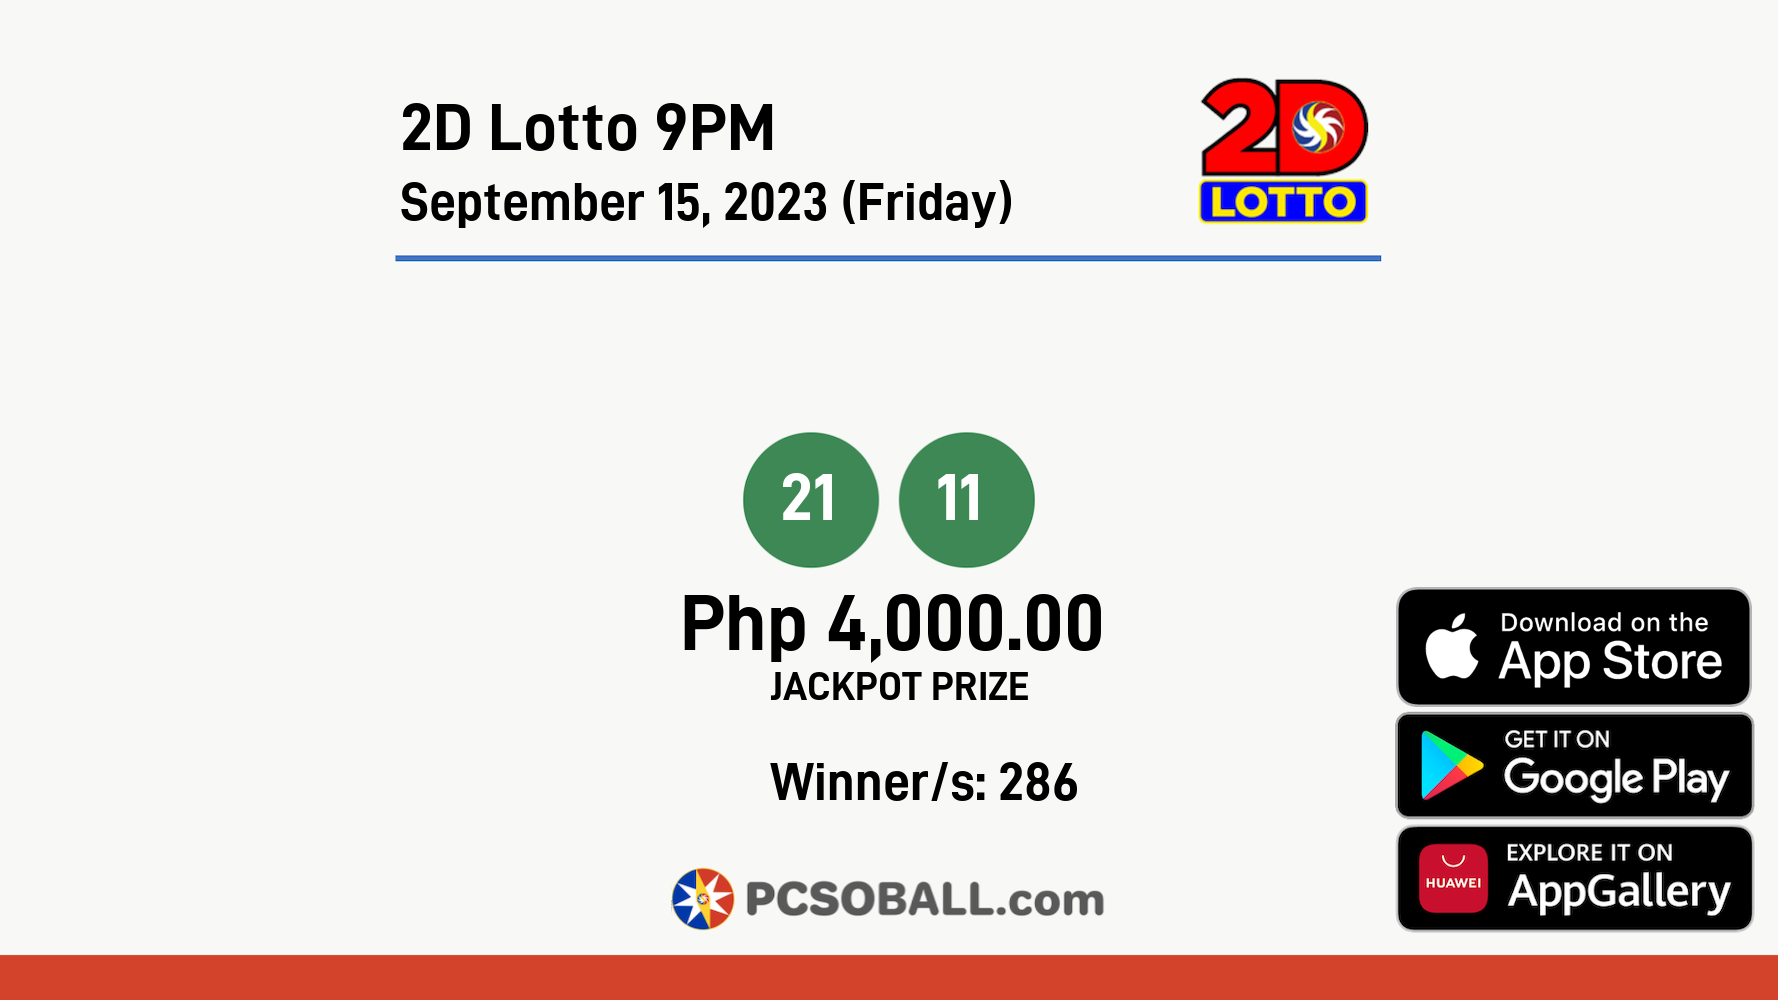 2D Lotto 9PM September 15, 2023 (Friday) Result